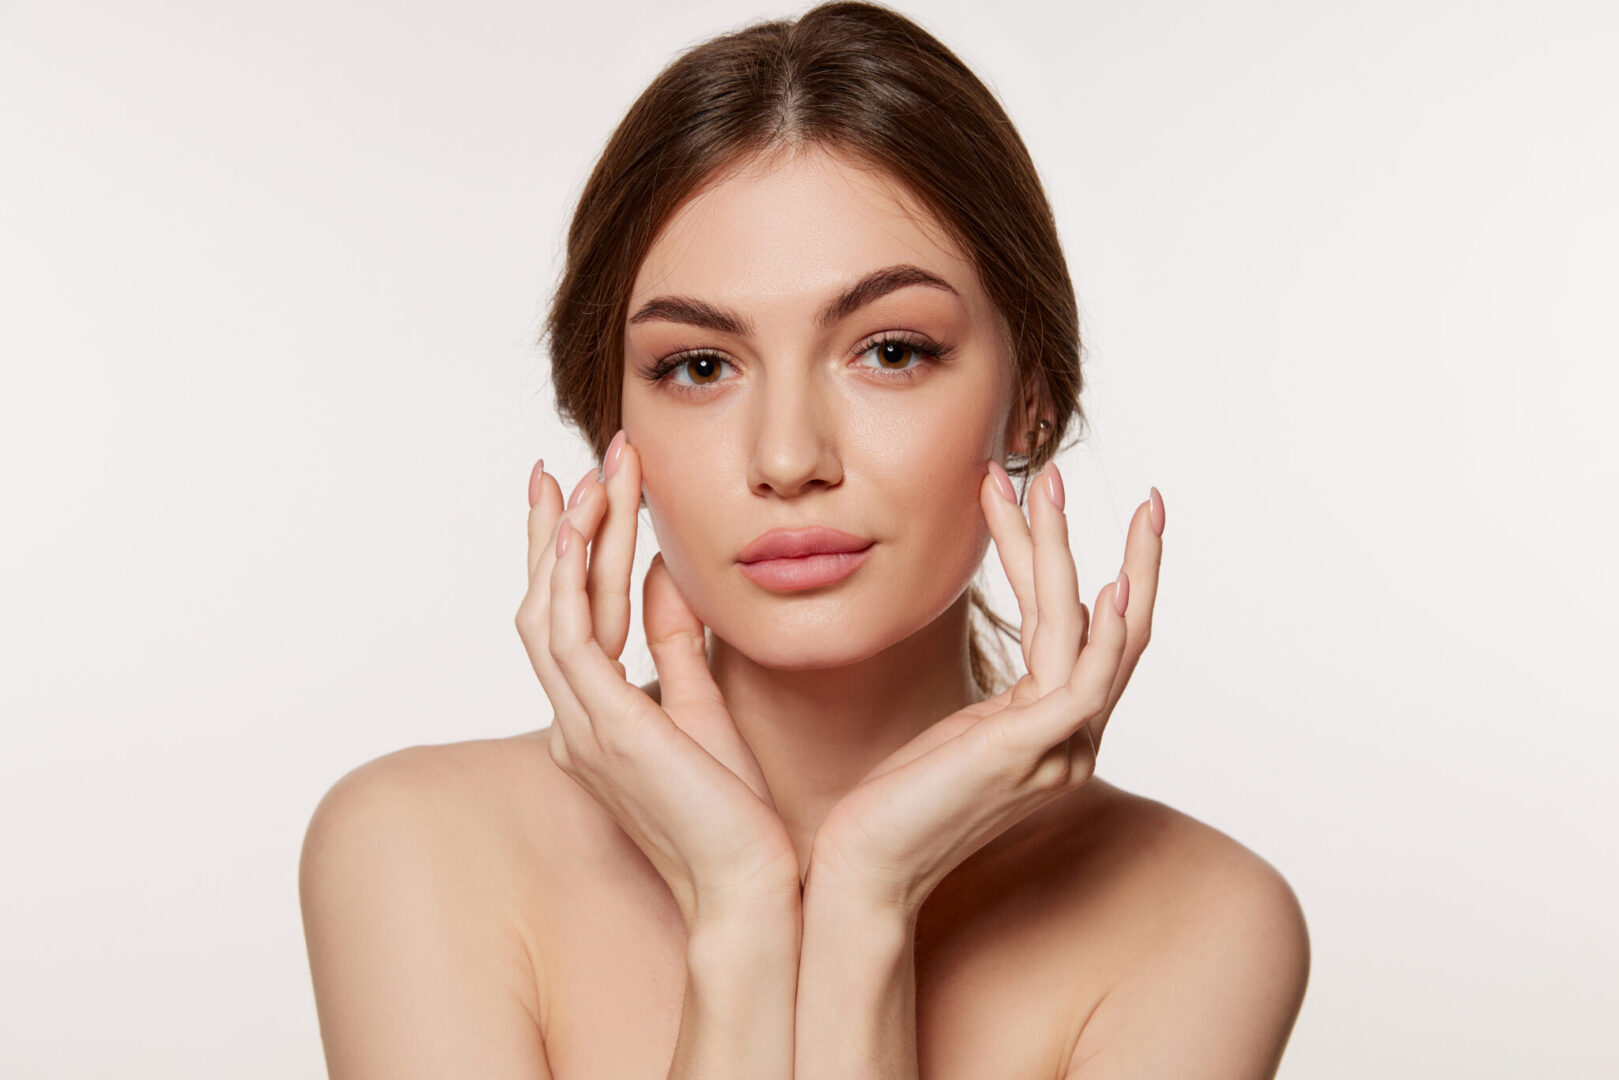 Facial cosmetic surgery with Aspire Surgical in Salt Lake City, UT